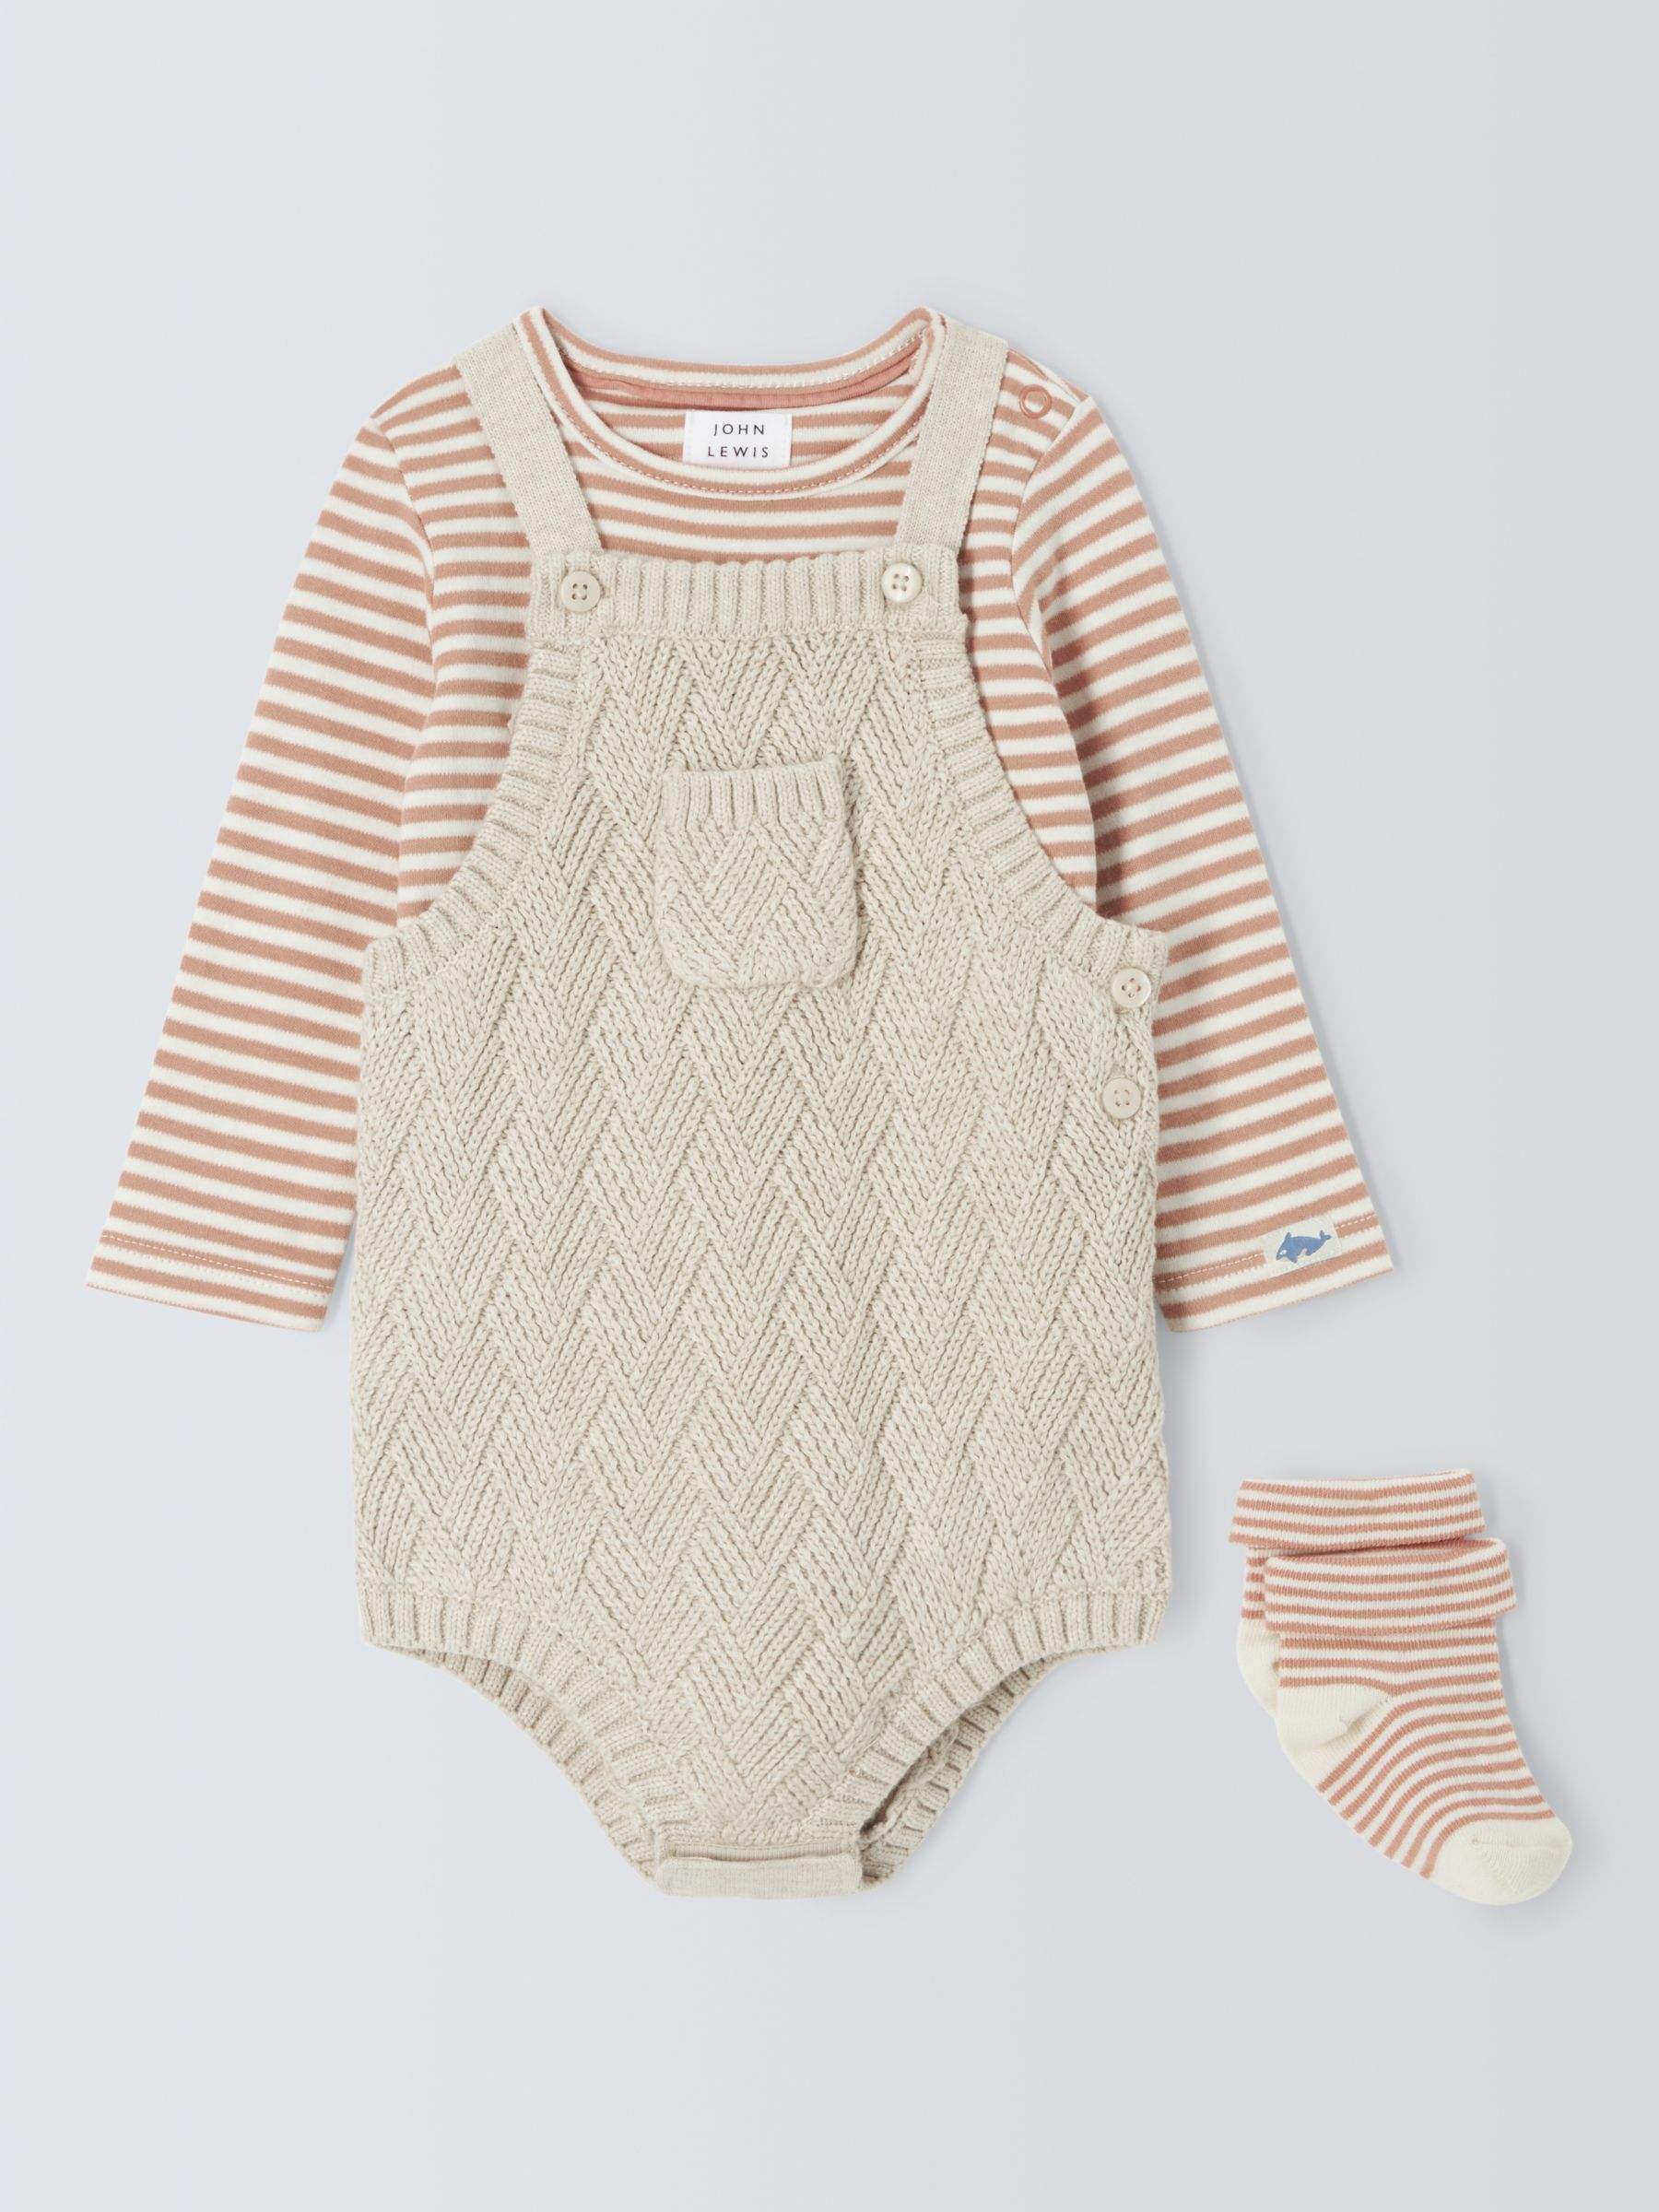 John Lewis Baby Knitted Dungaree Bodysuit, T-Shirt and Socks Set, Neutrals, 6-9 months